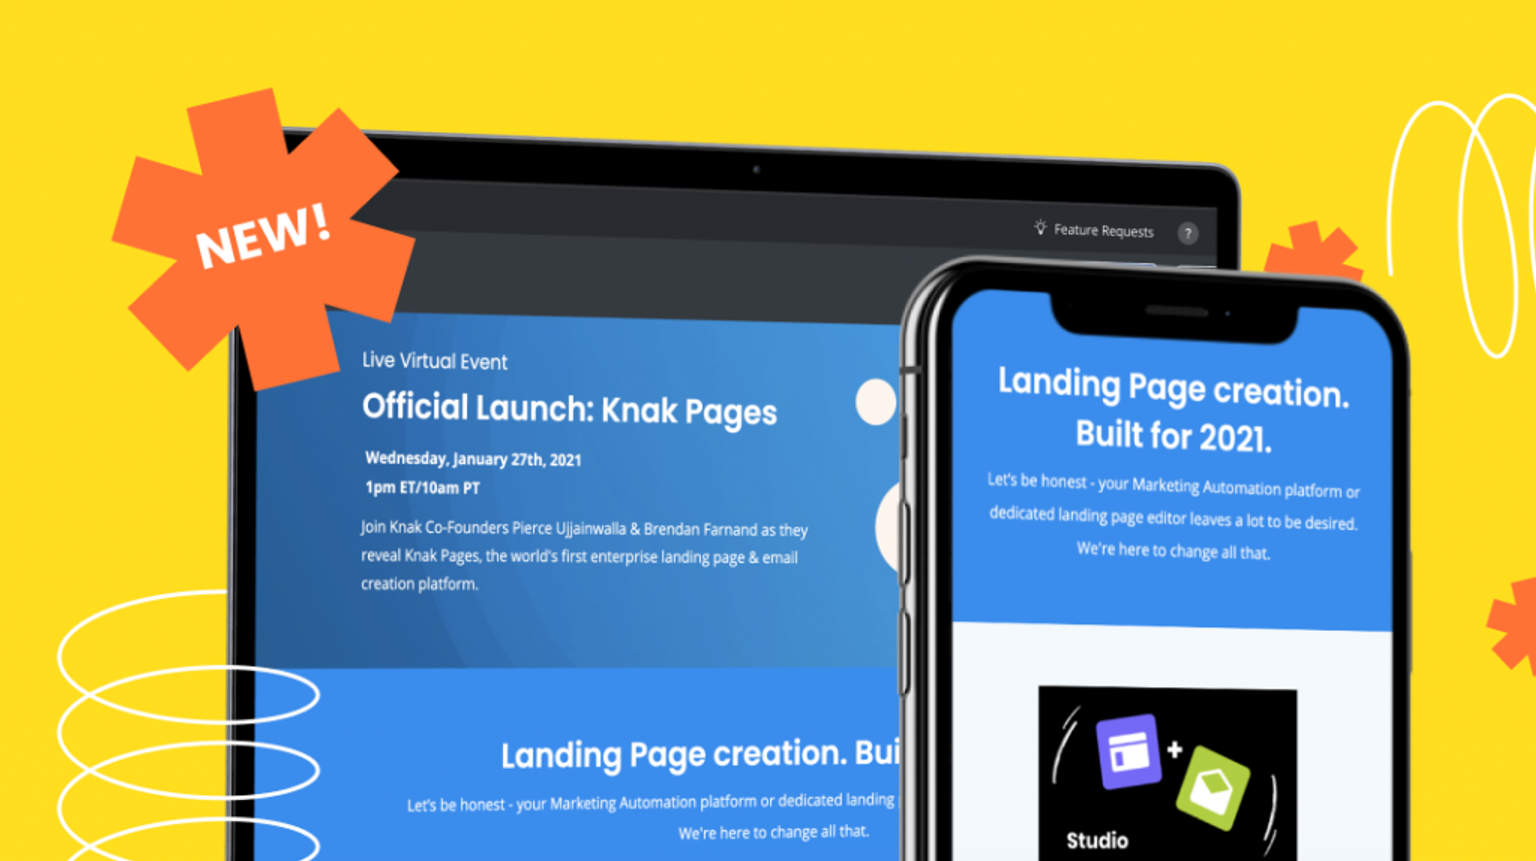 Introducing Knak Pages